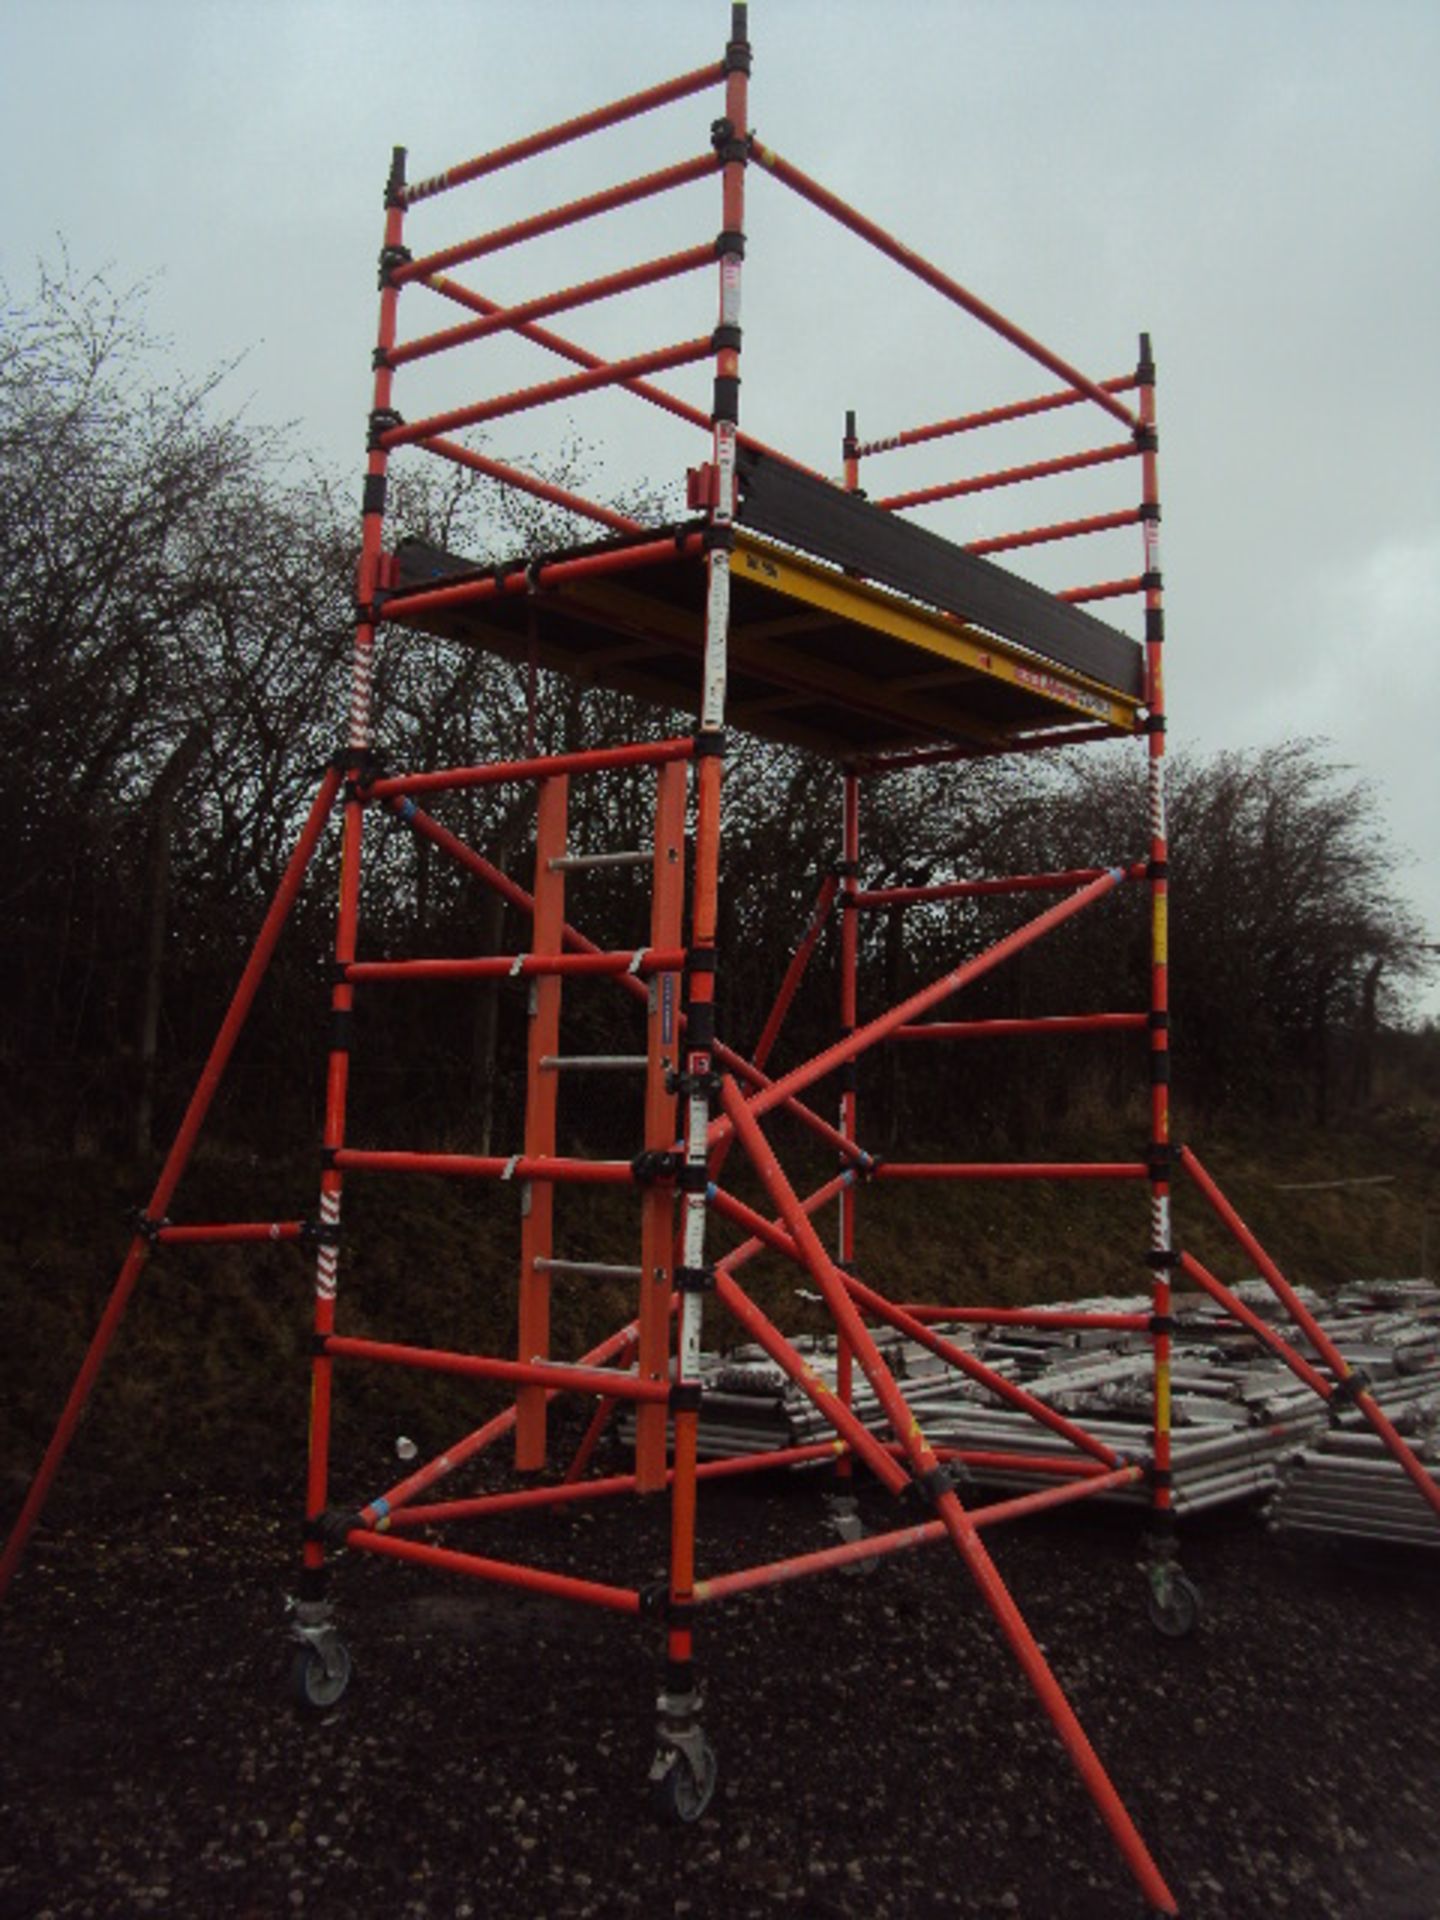 CLOW Advanced Scaffold 4.5m mobile fibreglass scaffold tower. Comprising uprights, bracing bars, - Image 2 of 3